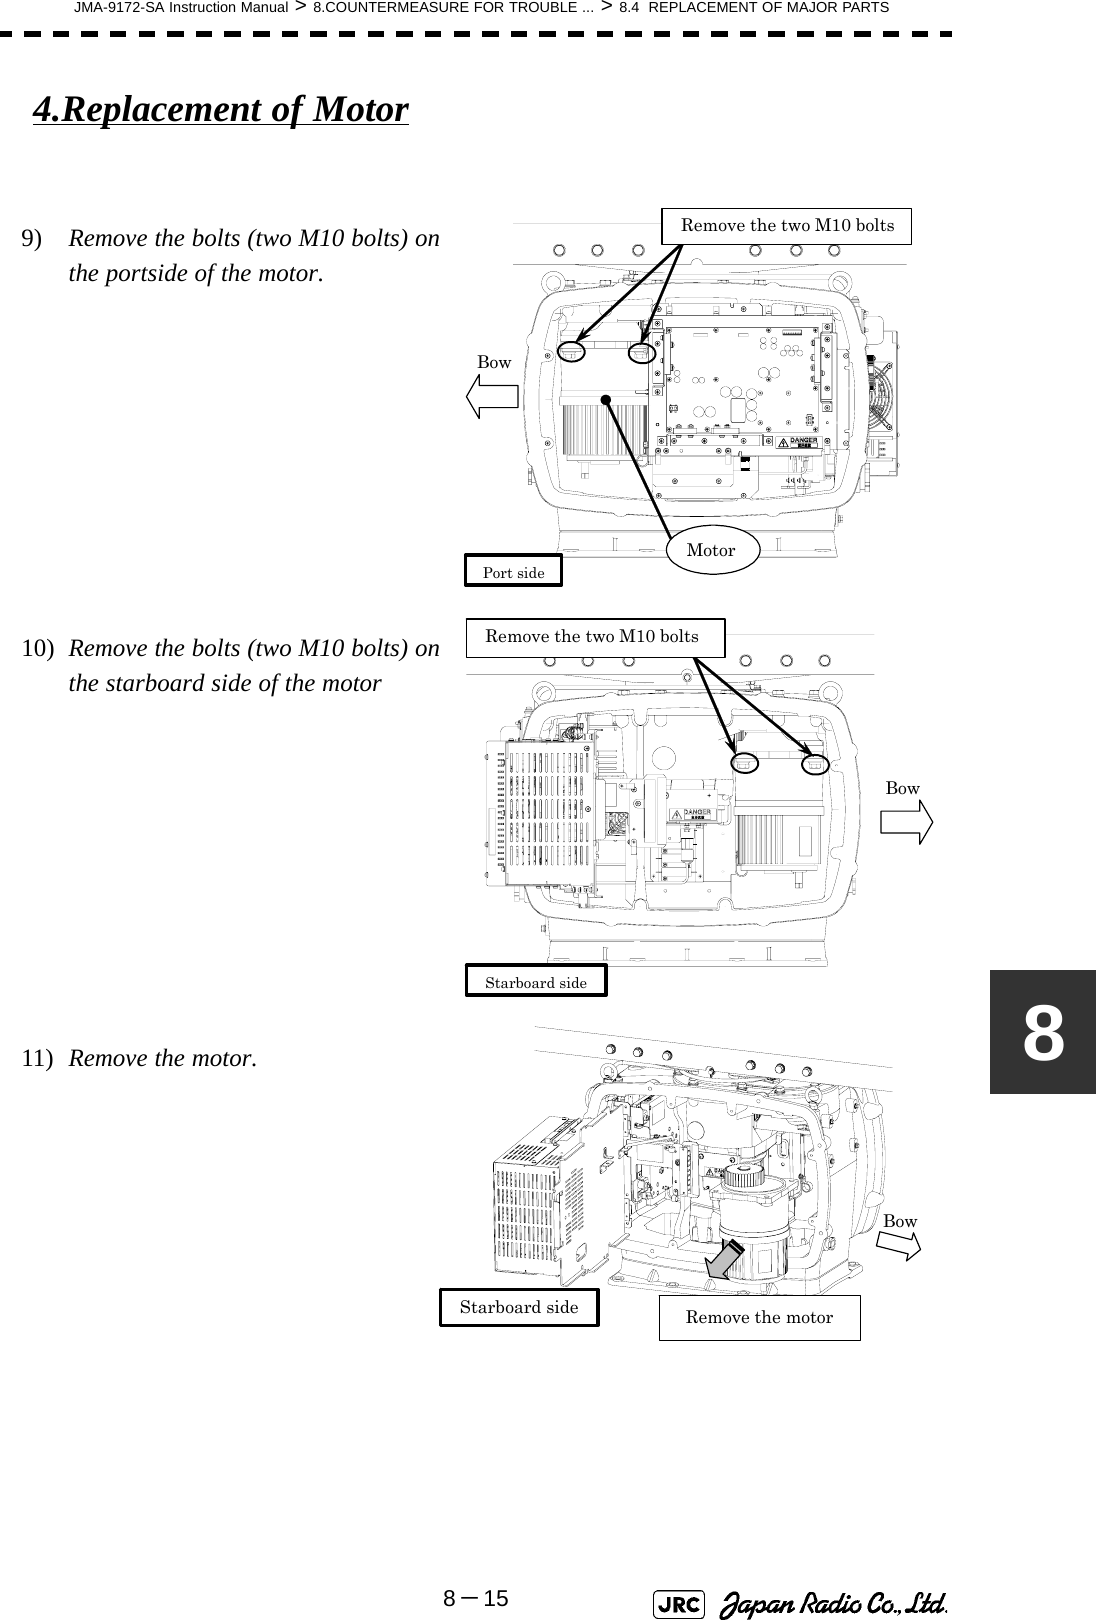 JMA-9172-SA Instruction Manual &gt; 8.COUNTERMEASURE FOR TROUBLE ... &gt; 8.4  REPLACEMENT OF MAJOR PARTS8－1584.Replacement of Motor9)  Remove the bolts (two M10 bolts) on the portside of the motor.10)  Remove the bolts (two M10 bolts) on the starboard side of the motor11)  Remove the motor.Port side Bow   Remove the two M10 bolts Motor Bow Starboard side   Remove the two M10 bolts Starboard side Bow Remove the motor 